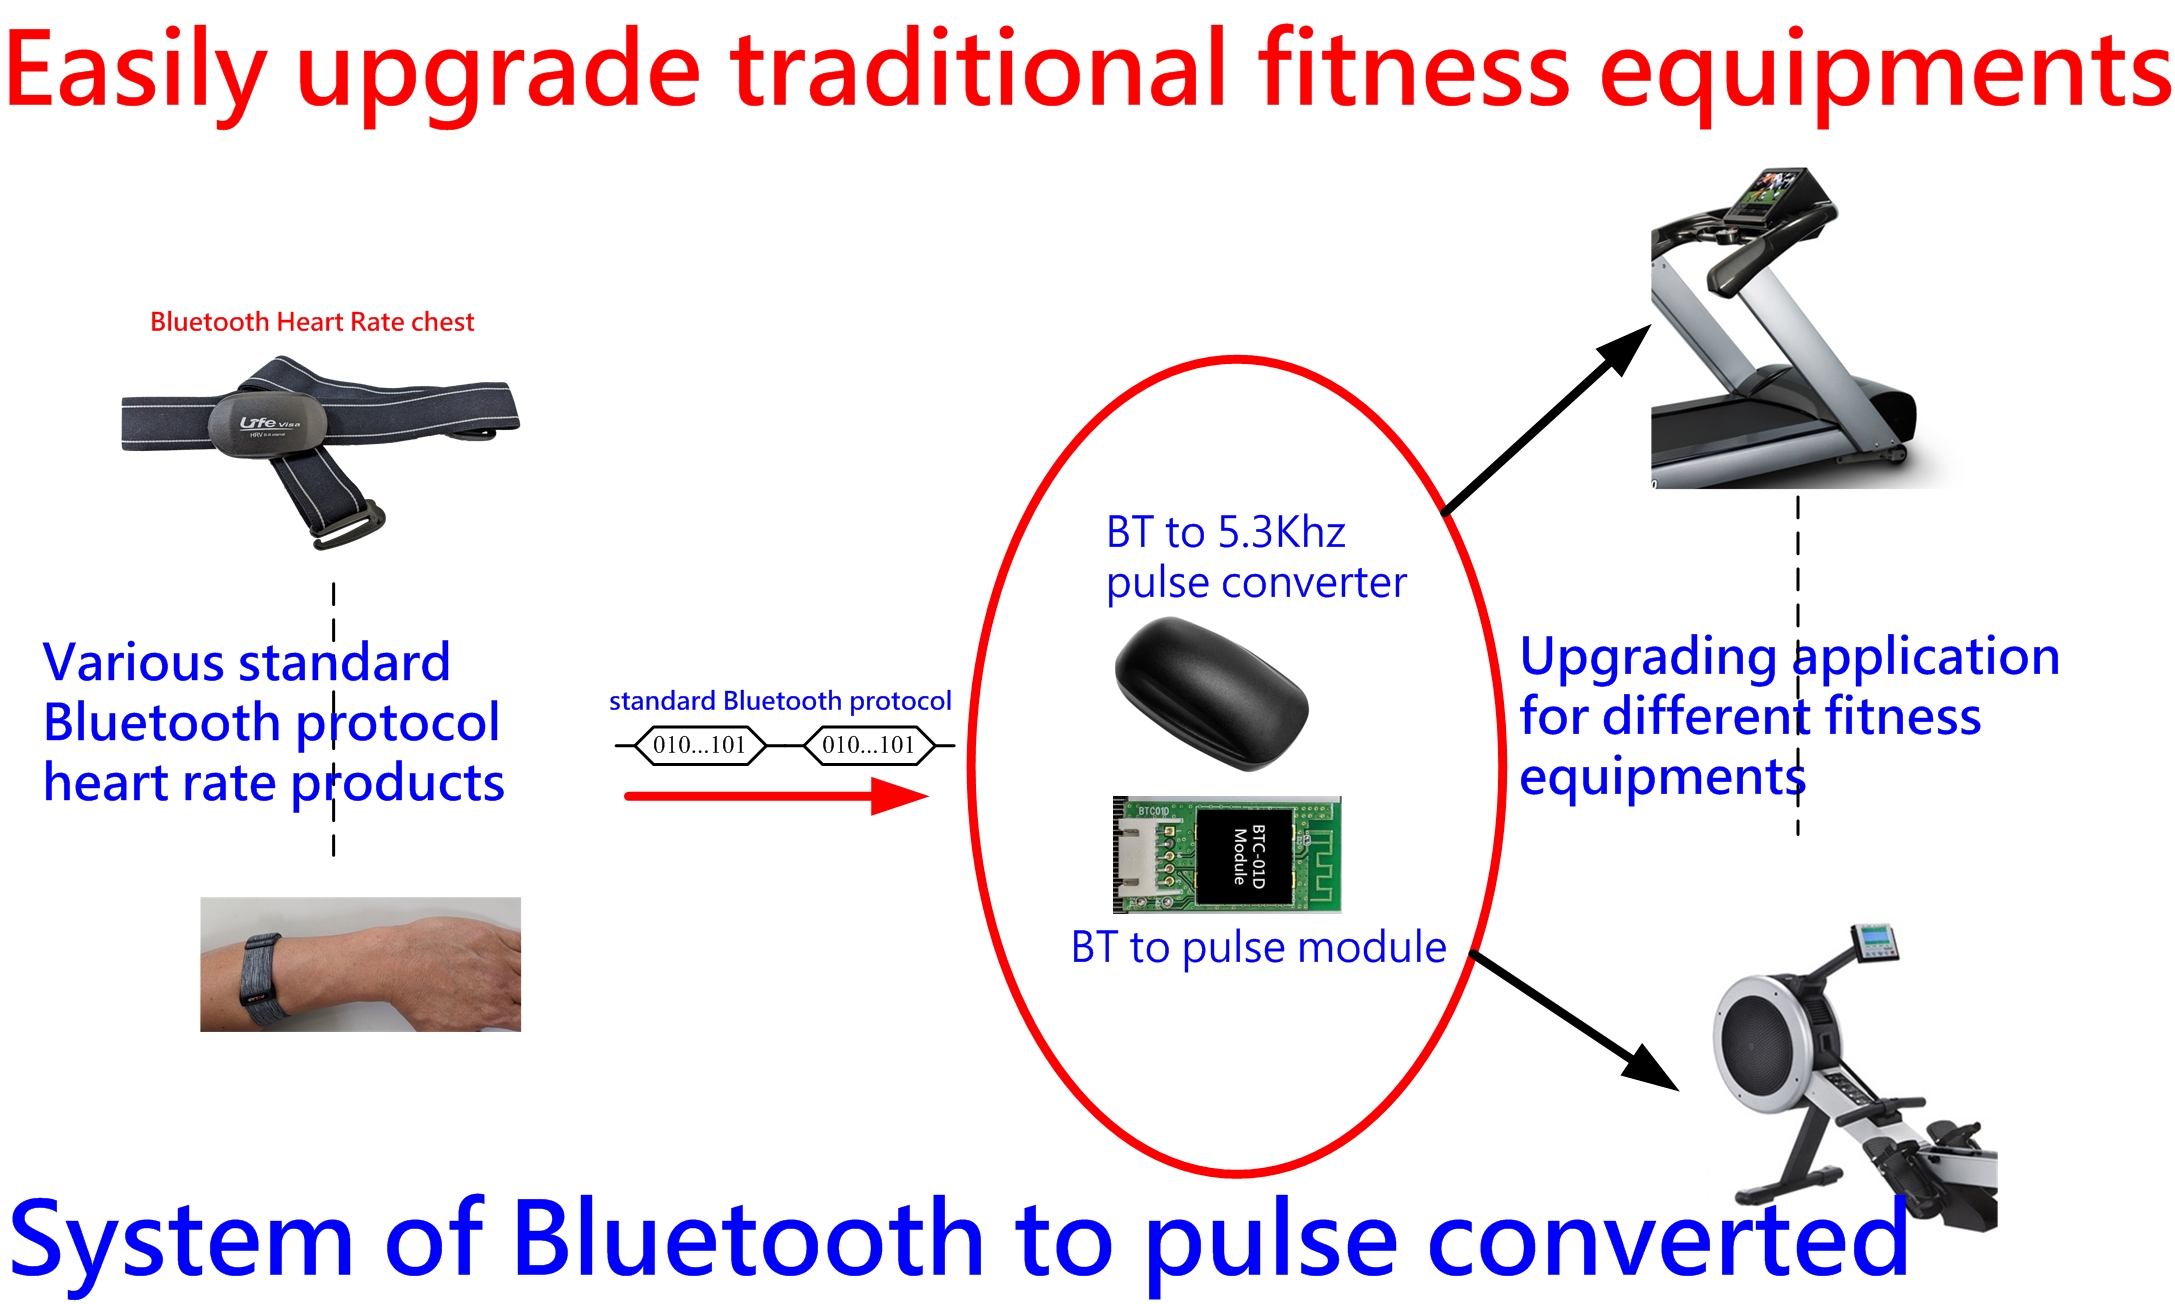 Bluetooth Heart rate to 5KHz RF pulse converter